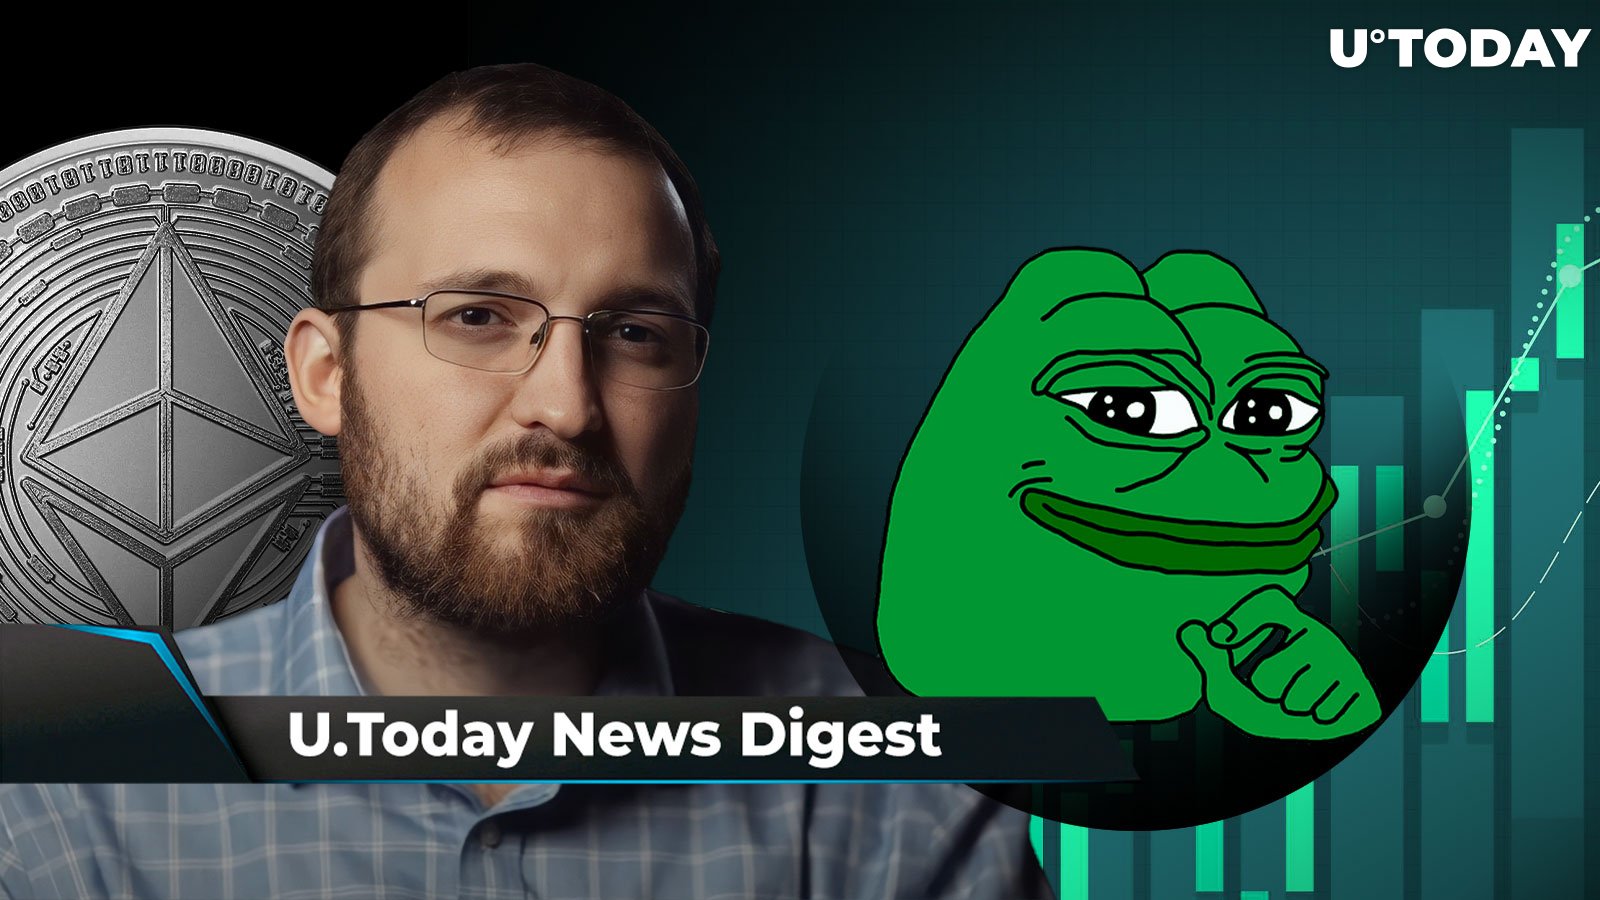 PEPE Beats SHIB in Trading Volume, Cardano's Hoskinson Built 'Nothing' for Ethereum, John Deaton Reacts to Coinbase's Response to SEC: Crypto News Digest by U.Today